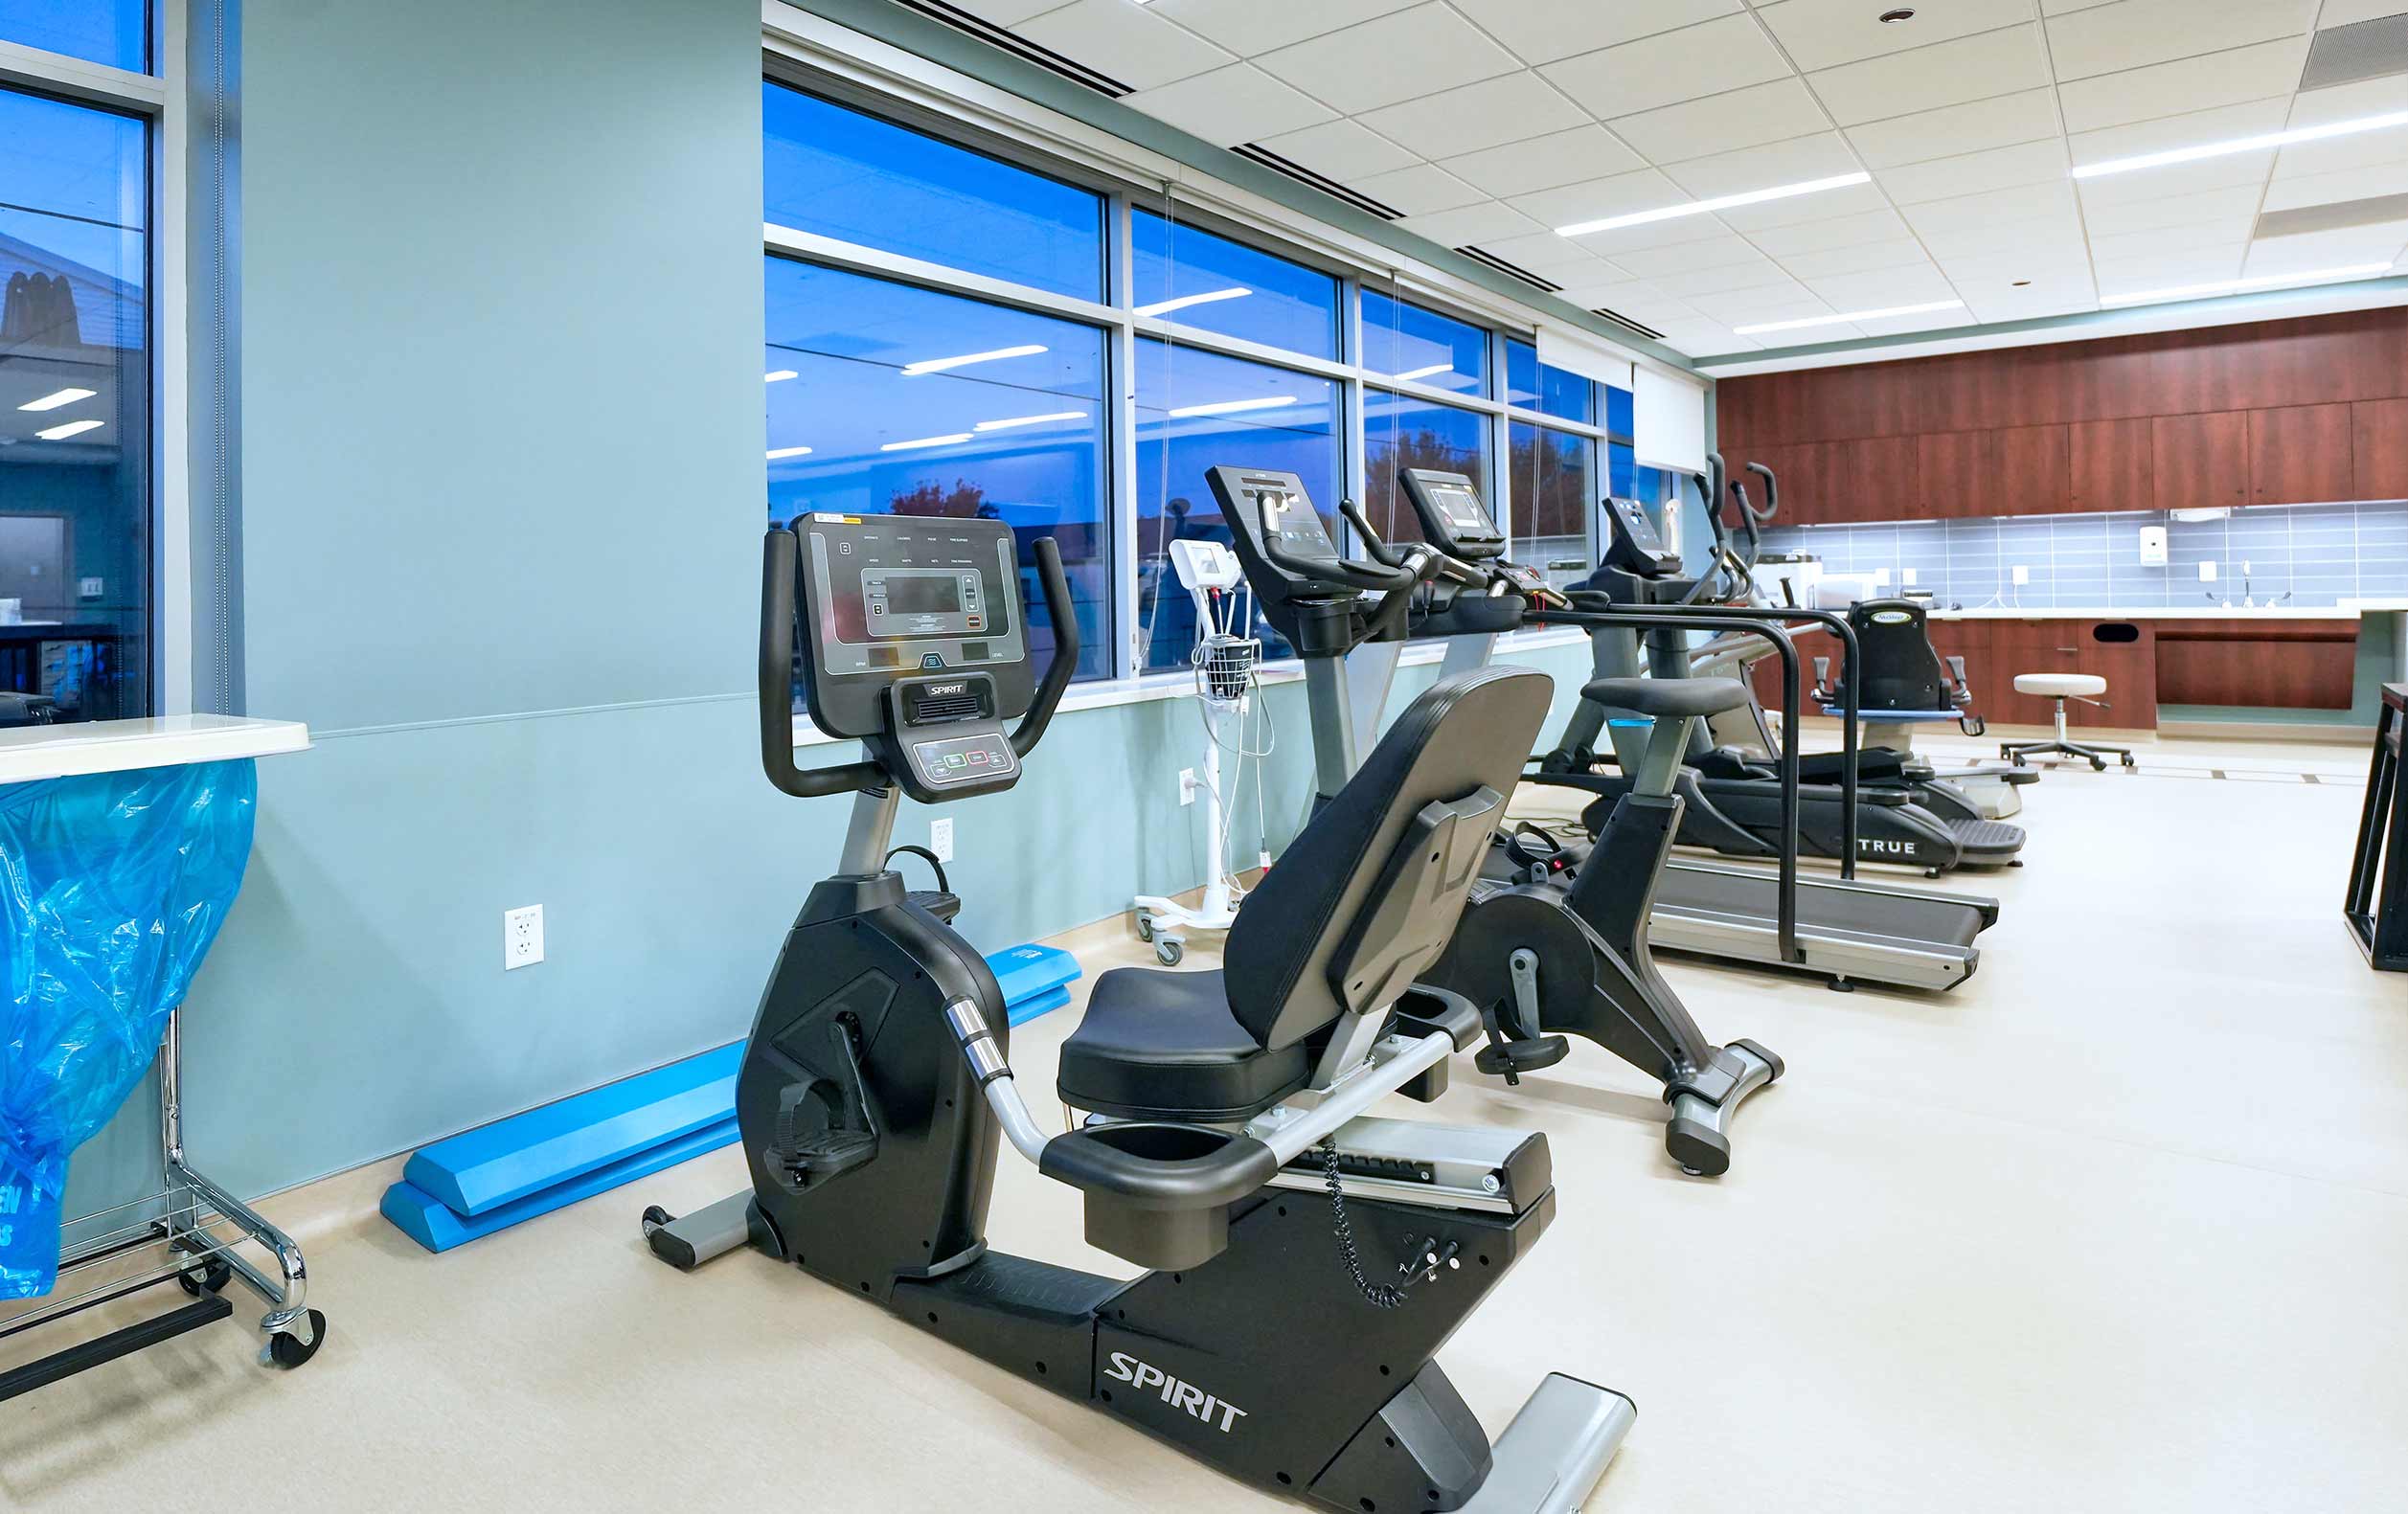 Physical therapy room with bikes and large windows